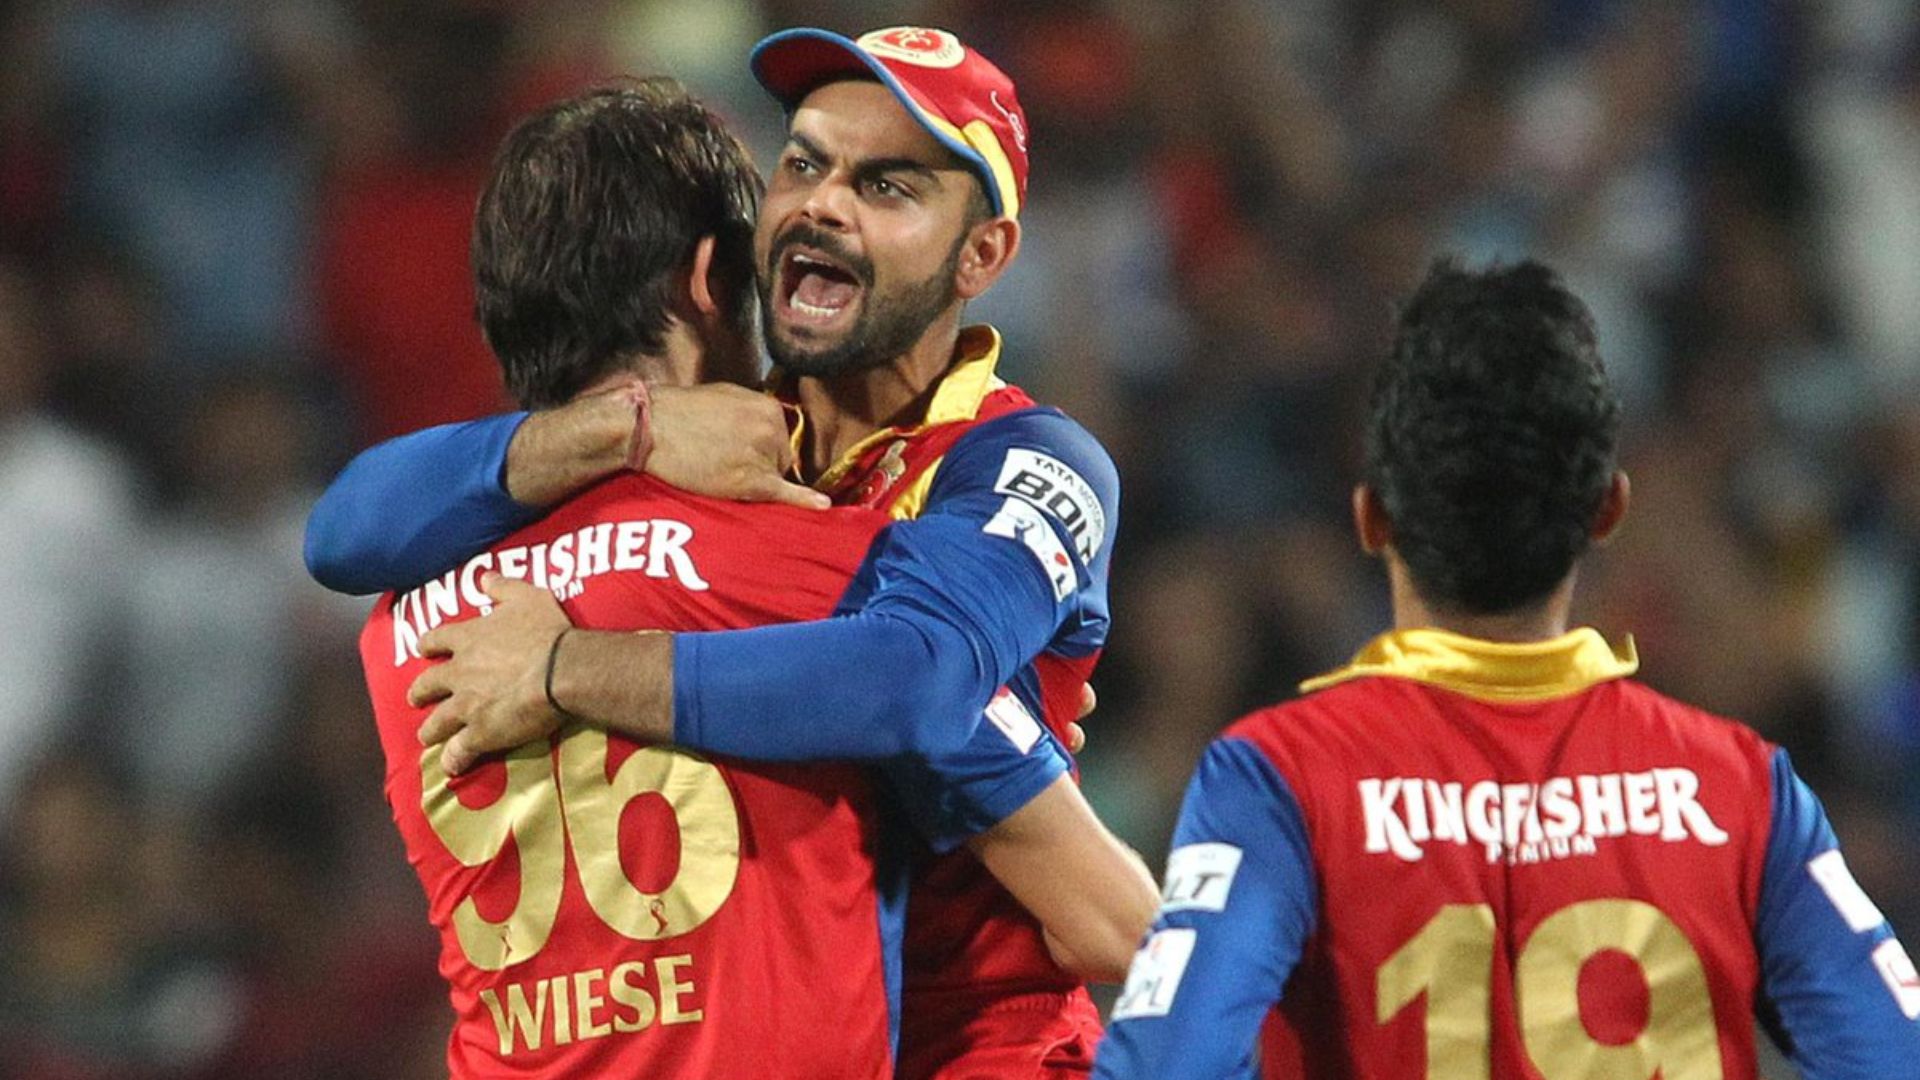 What Happened When RCB And RR Faced Each Other In IPL 2015 Eliminator?